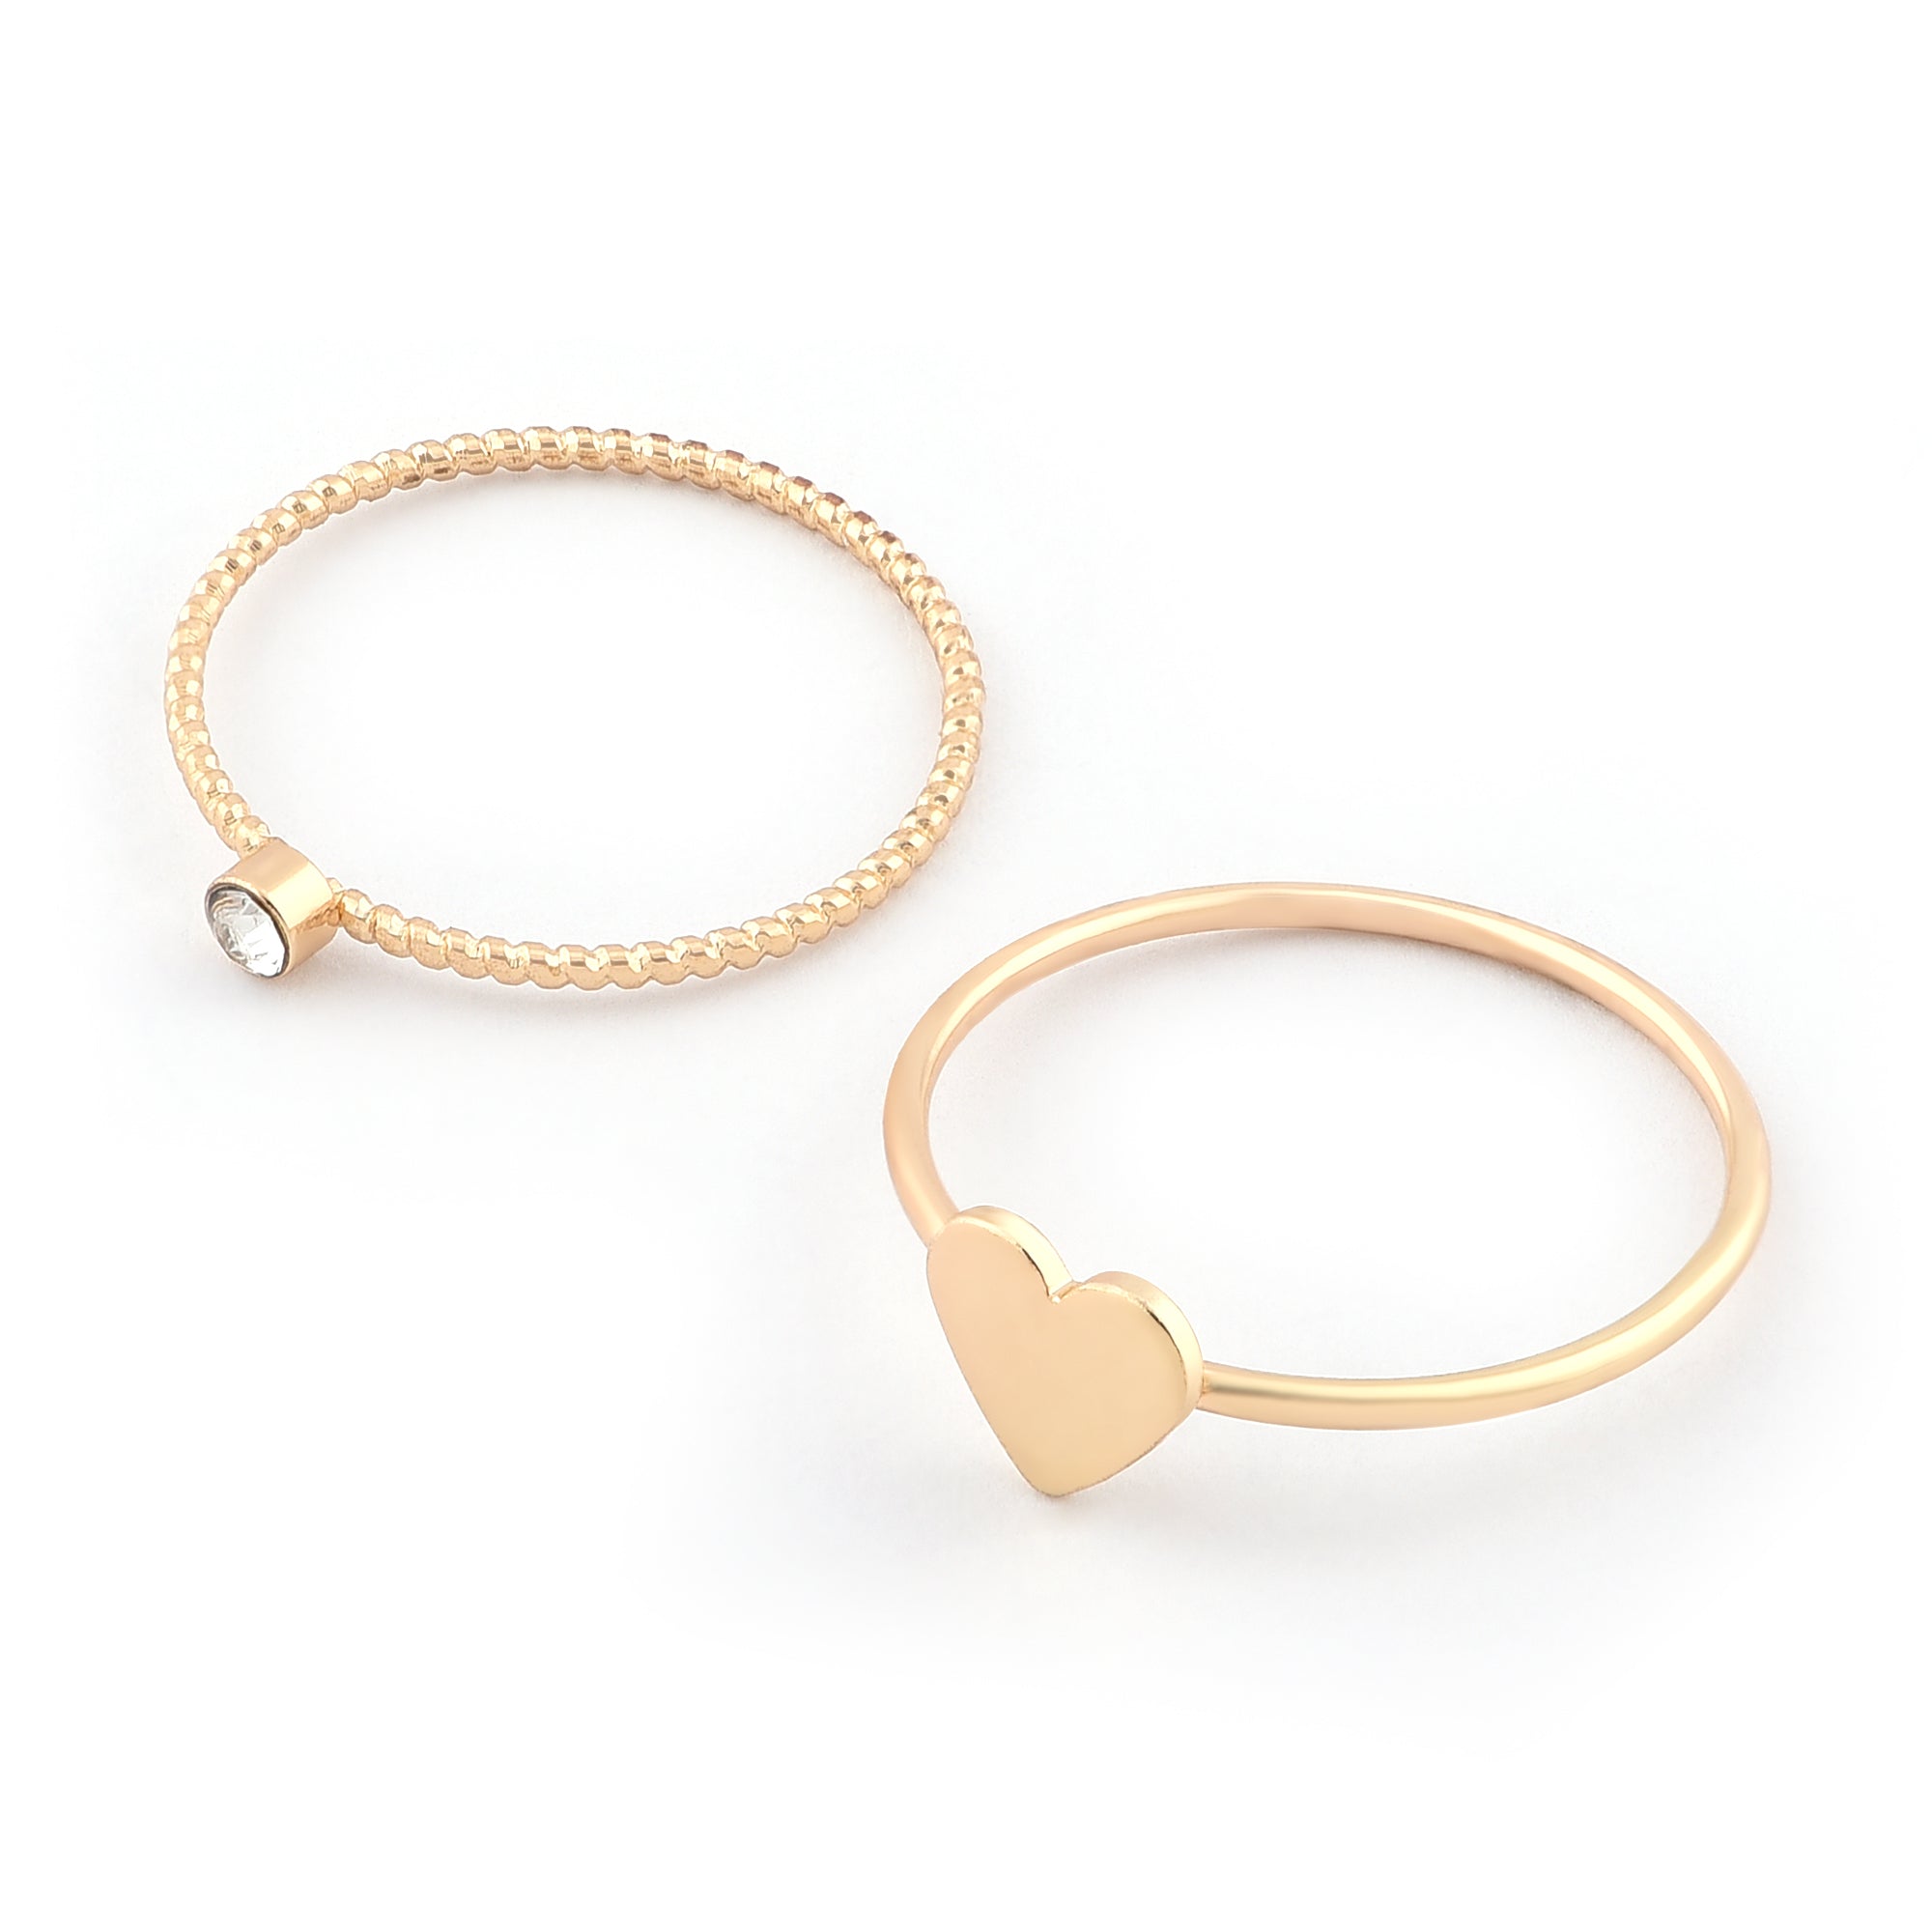 Accessorize London Women's Gold Pack of 2 Crystal & Heart Stacking Rings-Small